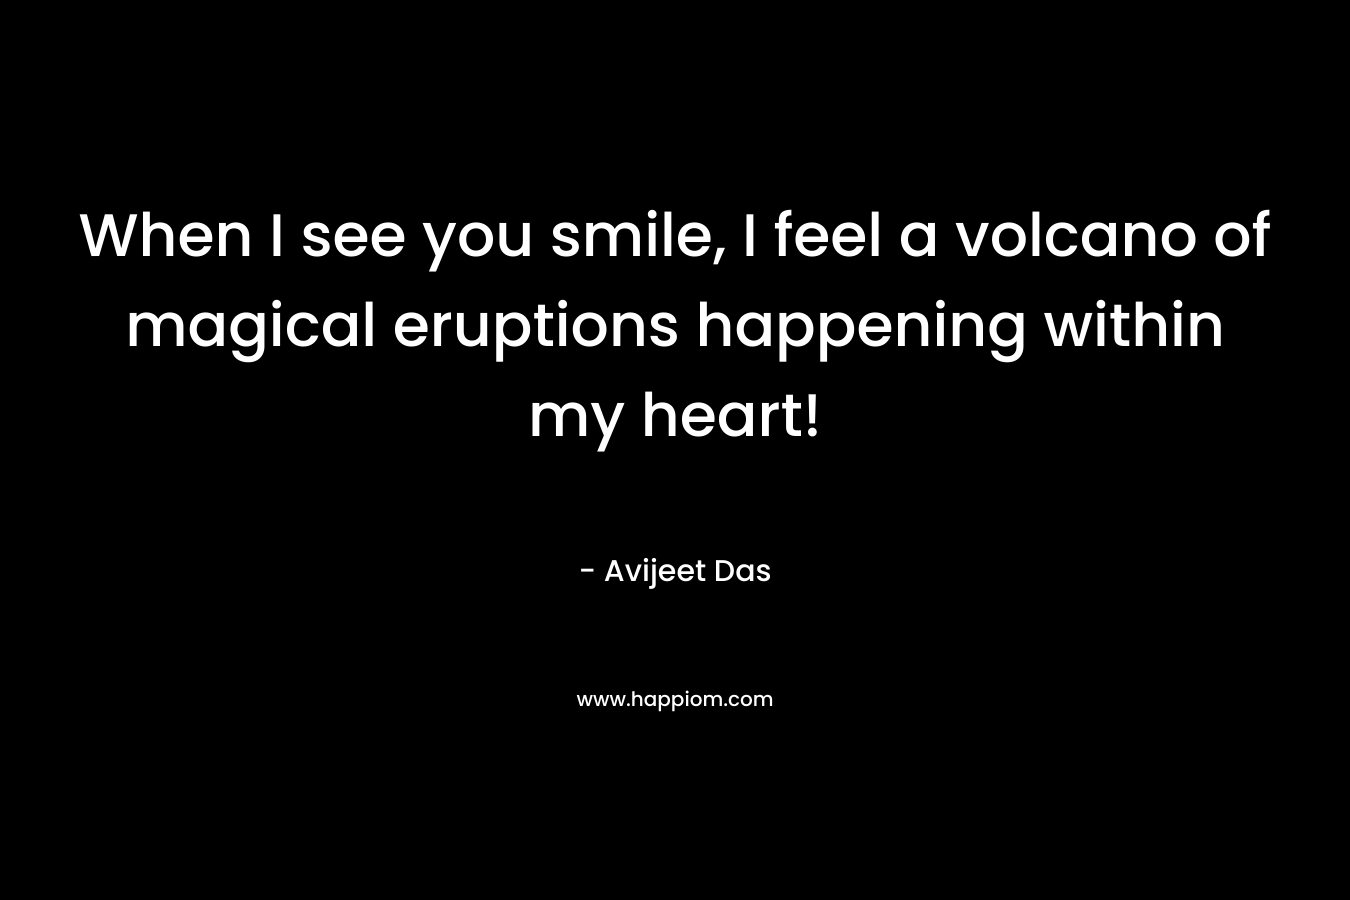 When I see you smile, I feel a volcano of magical eruptions happening within my heart! – Avijeet Das